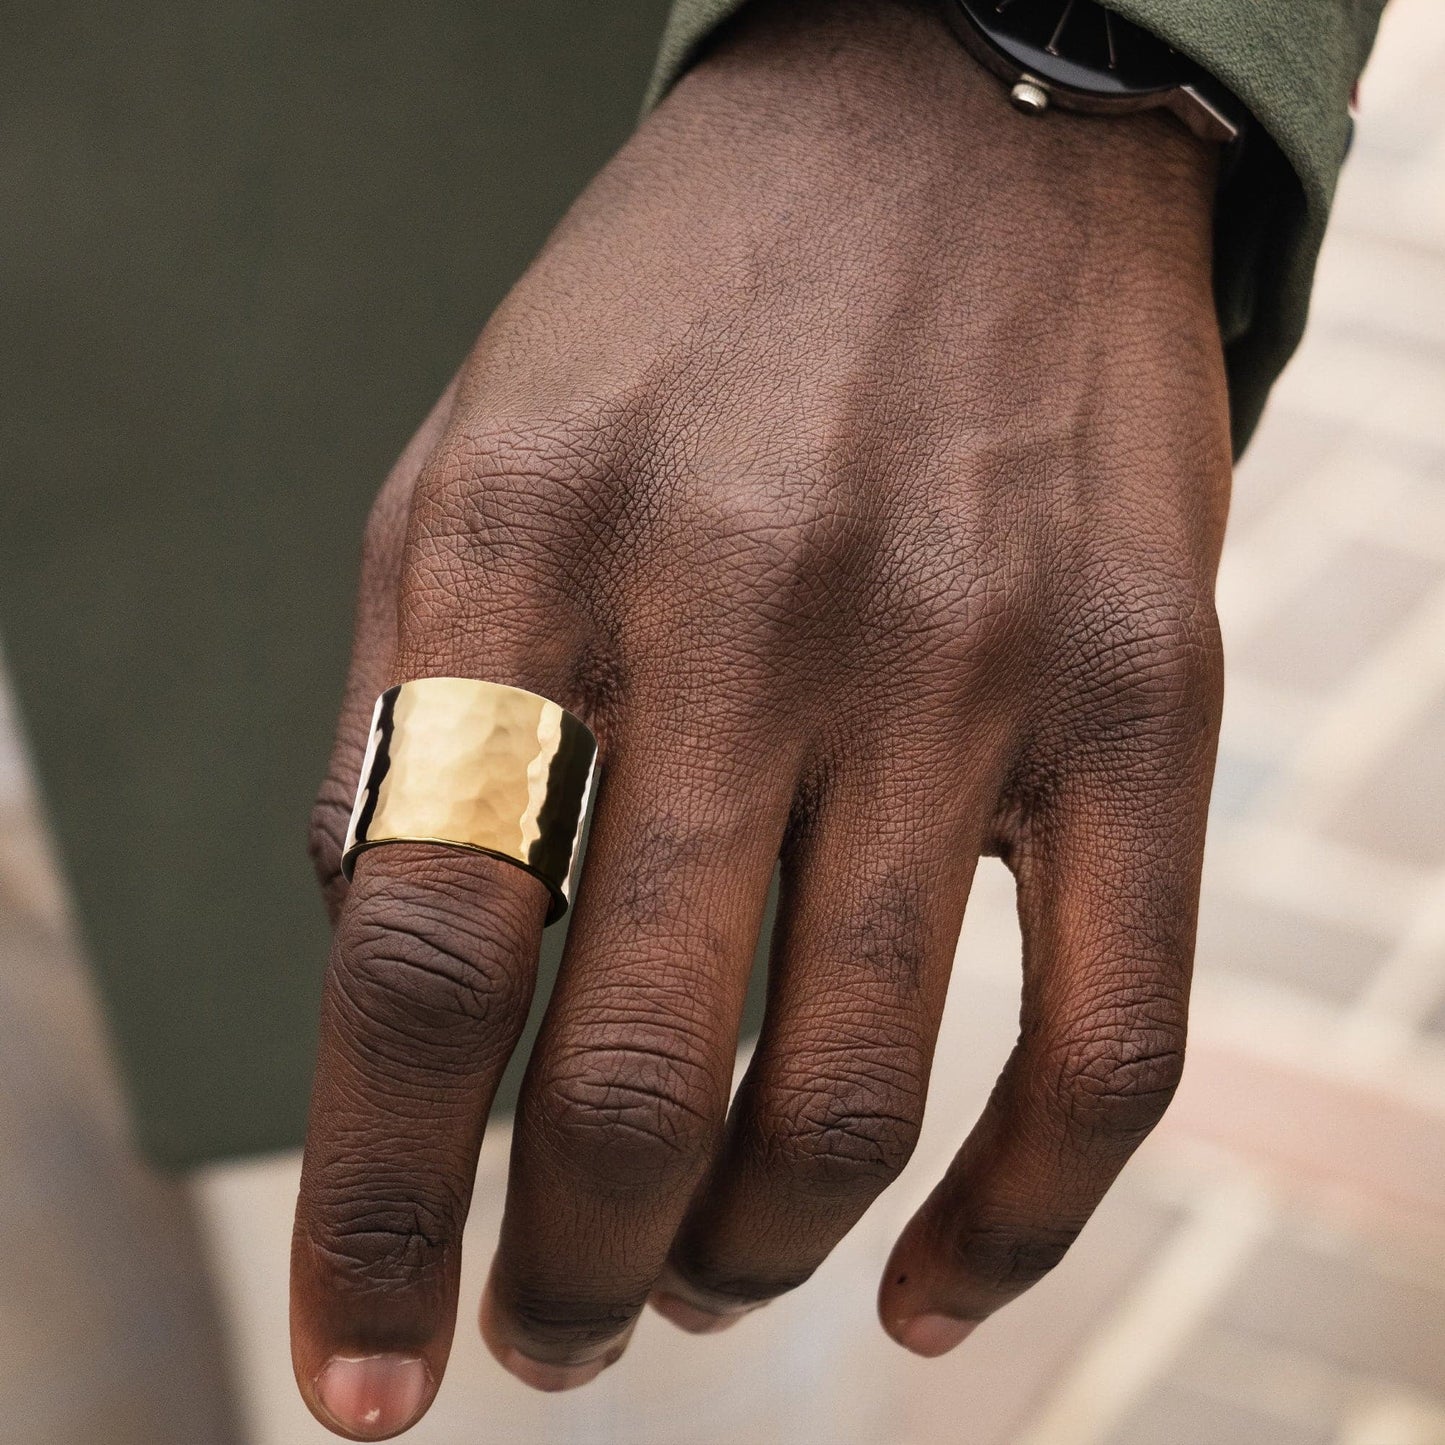 men's hammered wide ring by eklexic